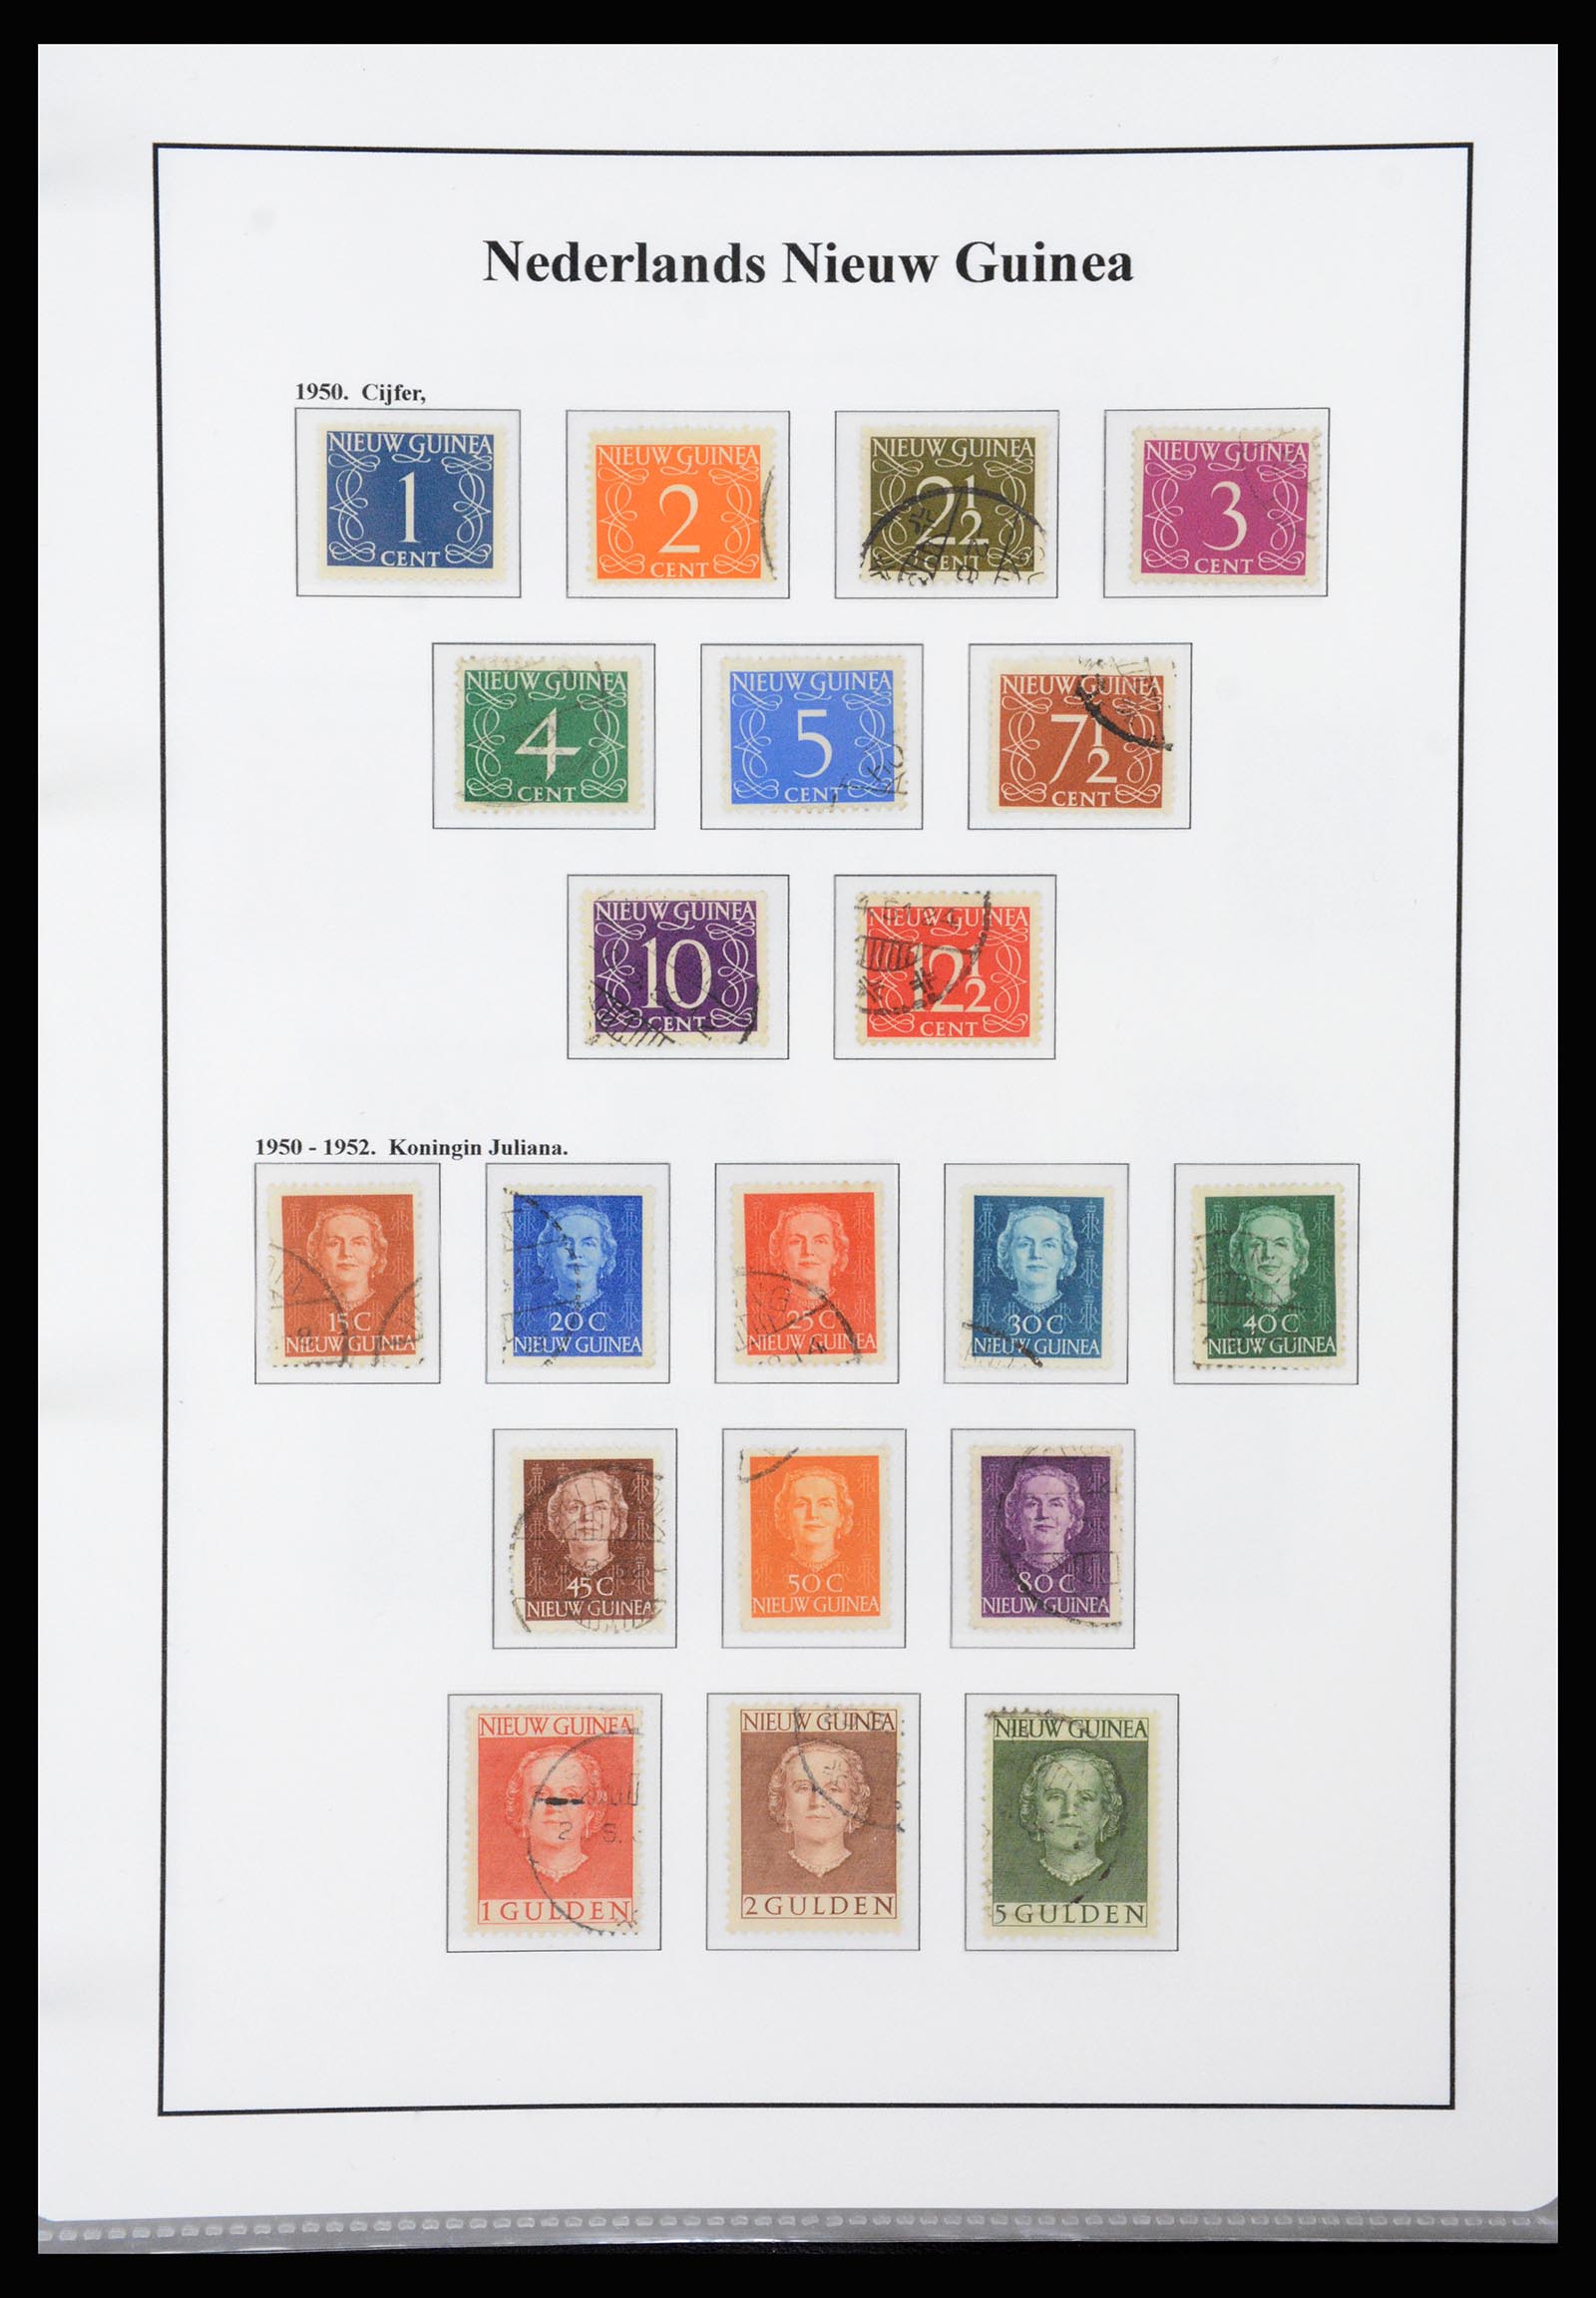 37247 039 - Stamp collection 37247 Dutch east Indies 1864-1949.